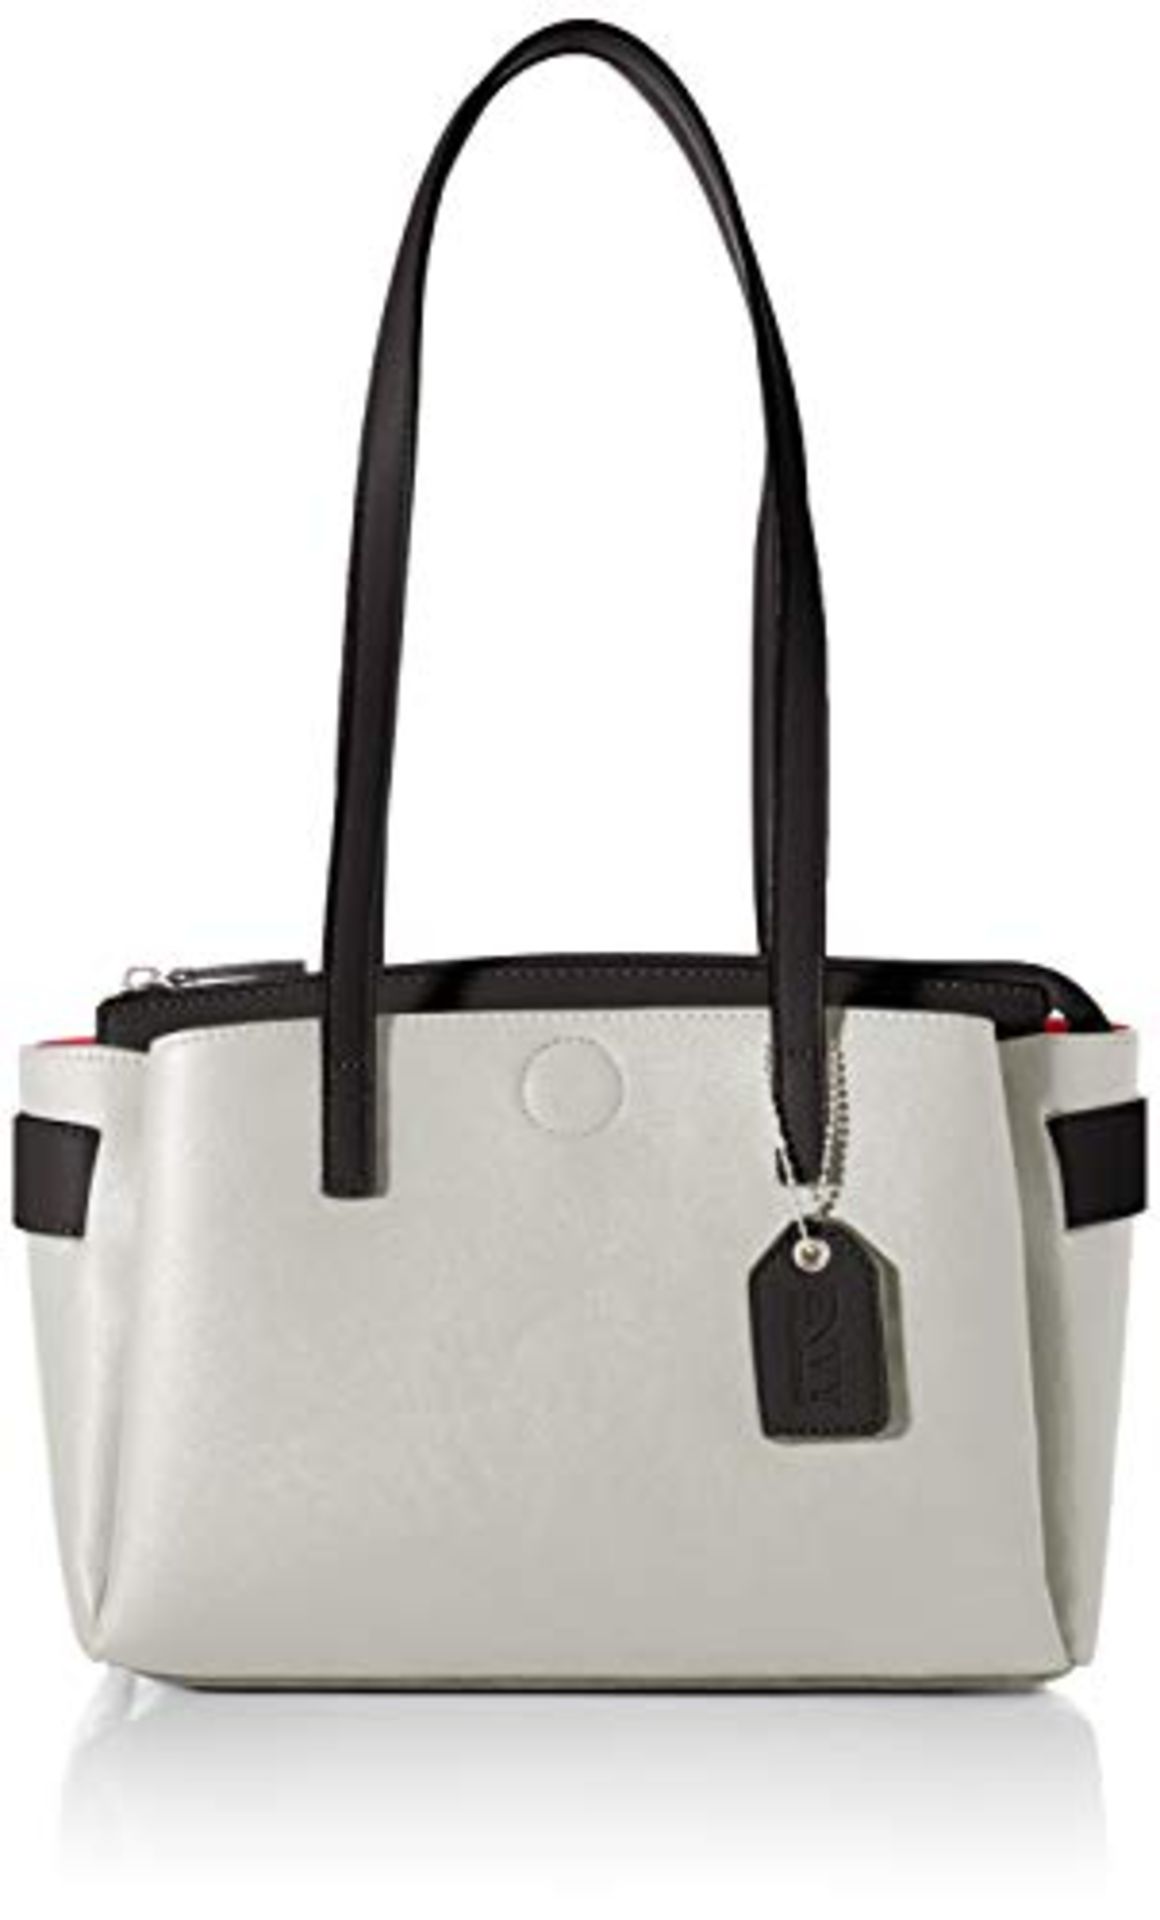 BRAND NEW N.V. Bags Women's 324 Shoulder, Grey, ONE Size RRP £32Condition ReportBRAND NEW